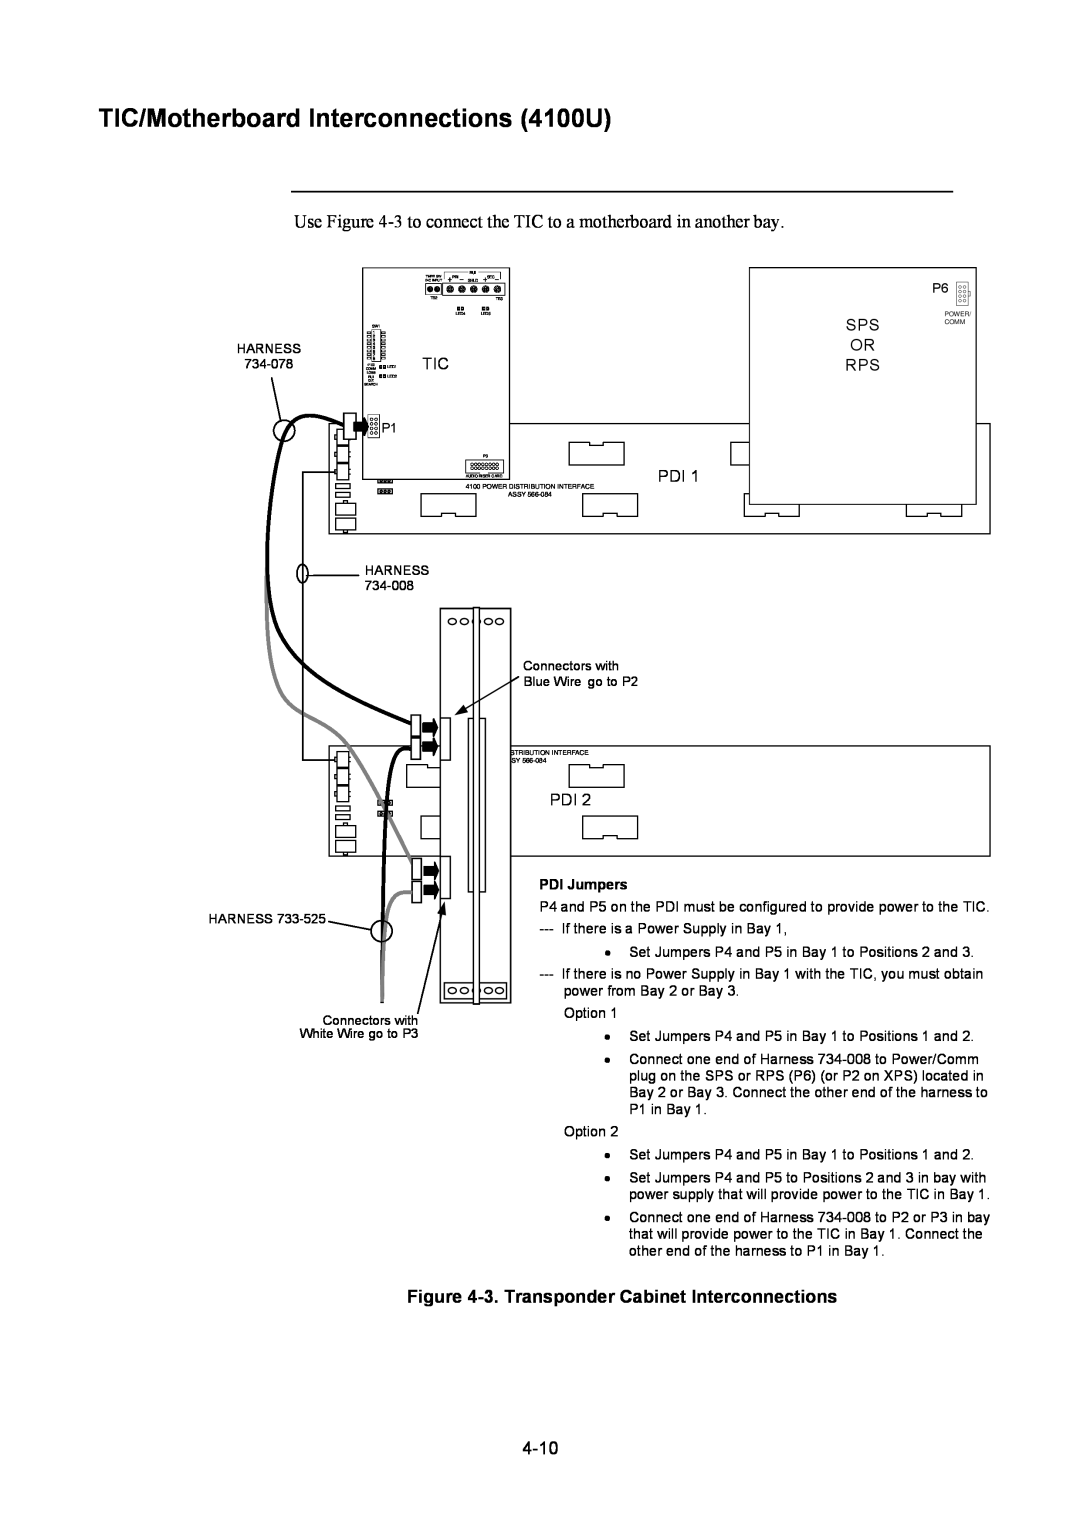 Tyco installation manual TIC/Motherboard Interconnections 4100U, 3.Transponder Cabinet Interconnections, PDI Jumpers 